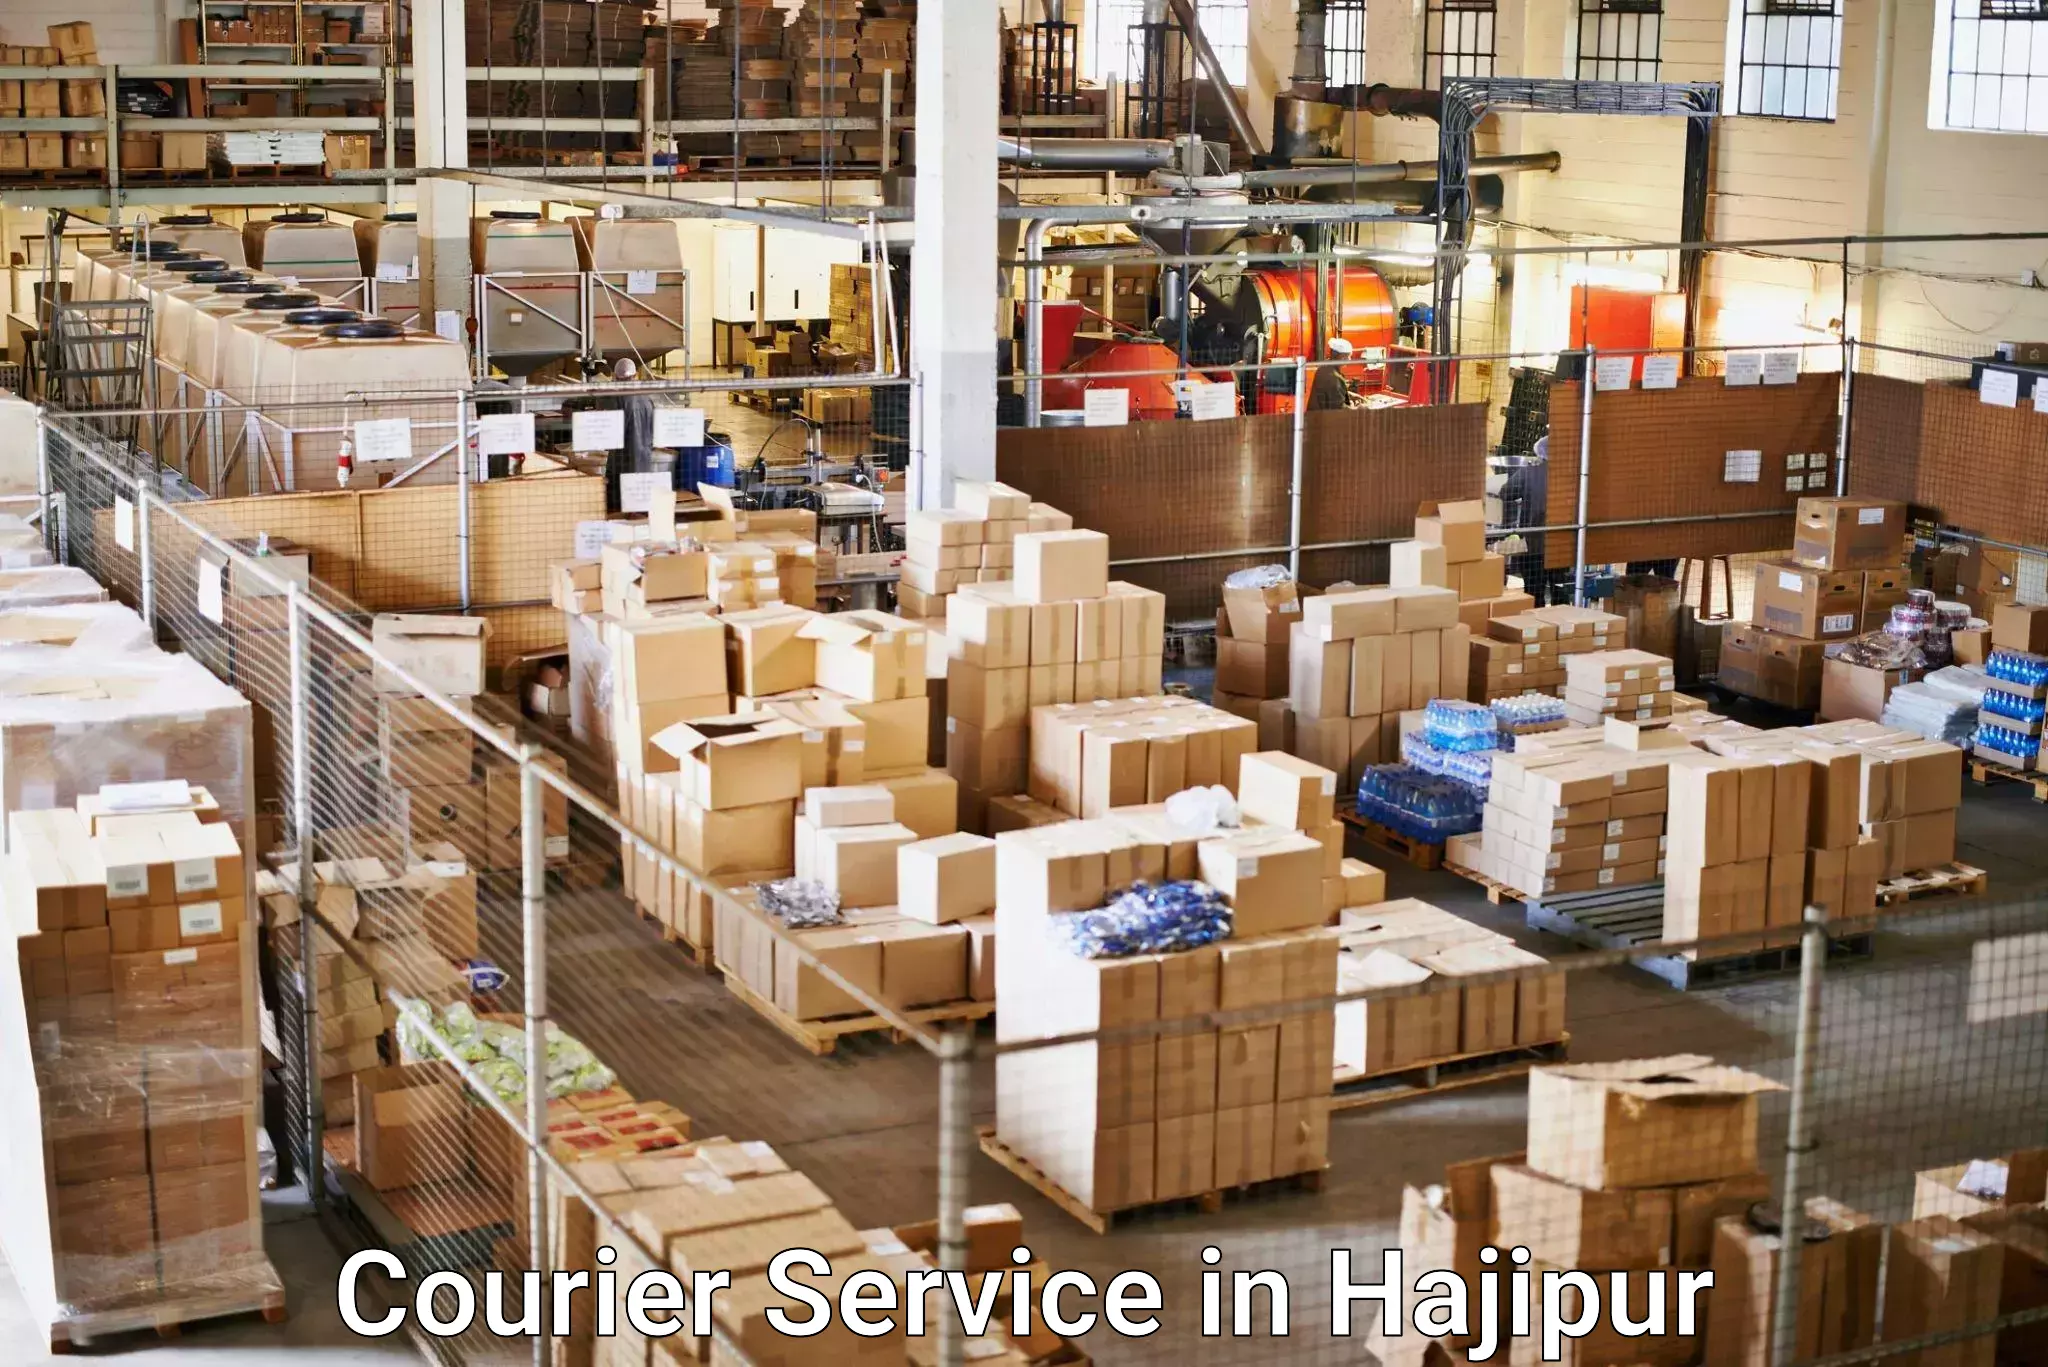 Parcel handling and care in Hajipur